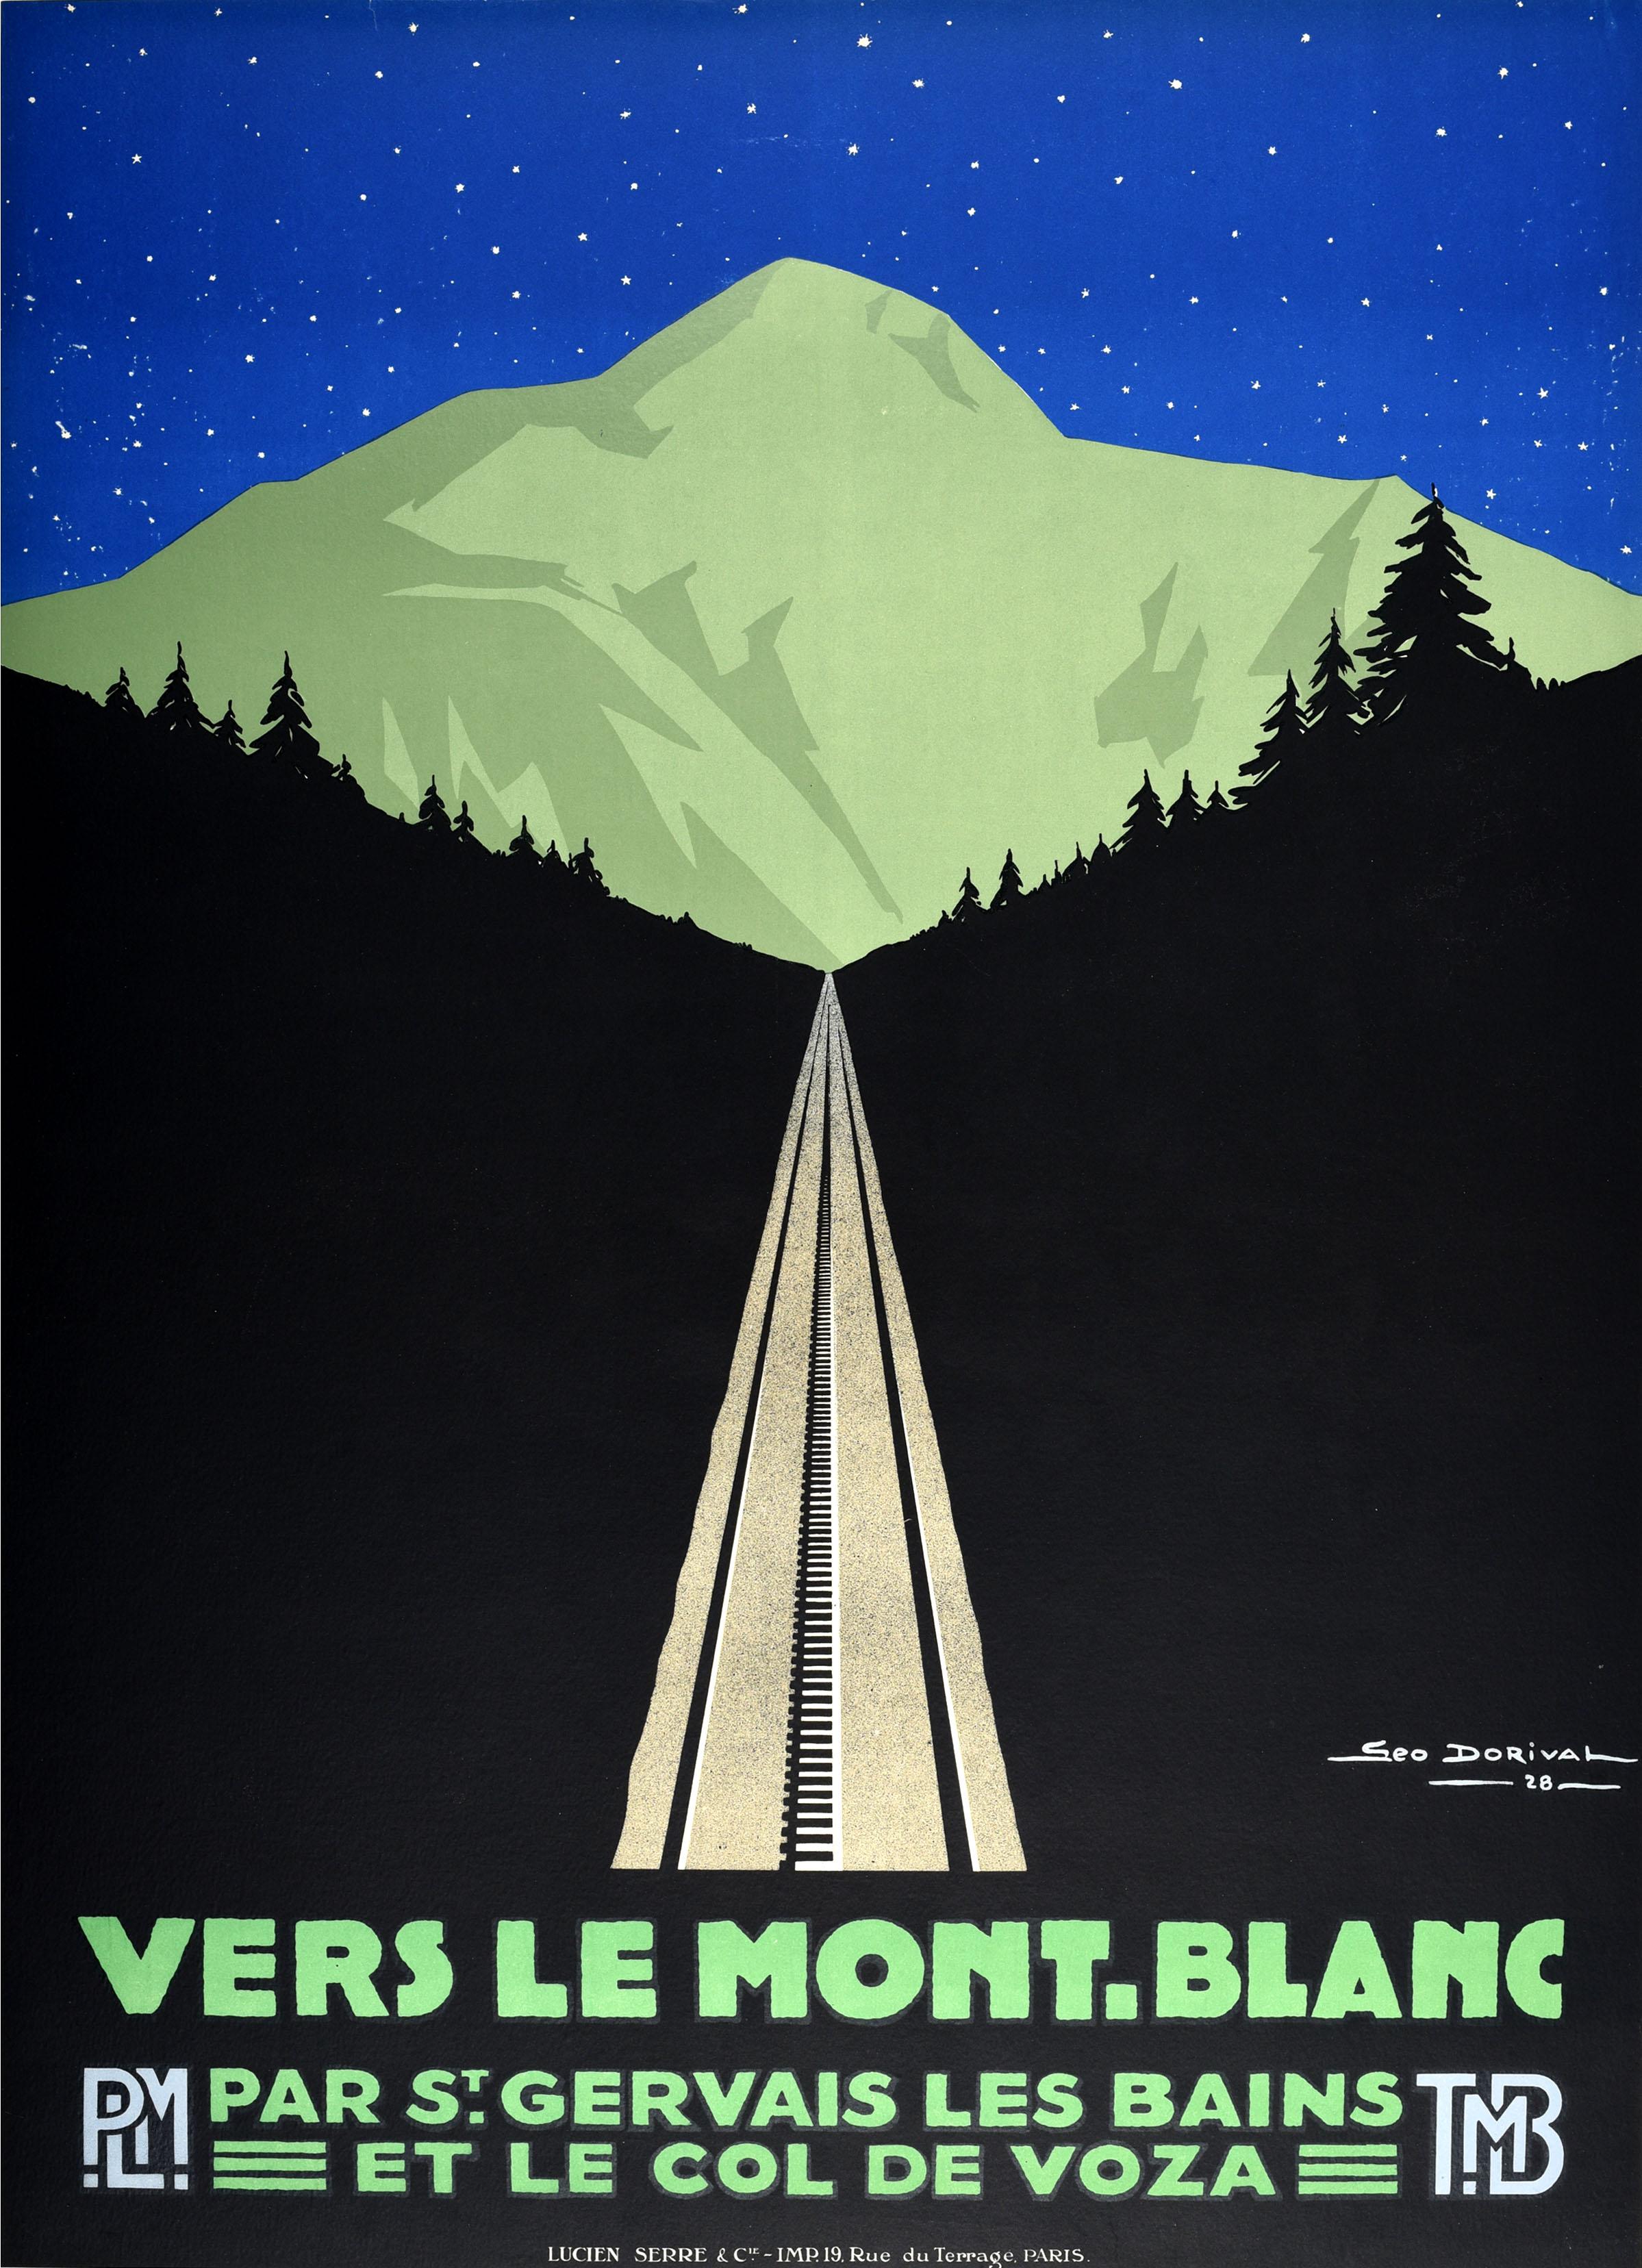 Set of three original vintage travel advertising posters published by the PLM Paris Lyon Mediterranee railway company and the TMB Mont Blanc Tramway for Mont Blanc (the highest mountain in Europe), via St Gervais Les Bains and the Col de Voza,